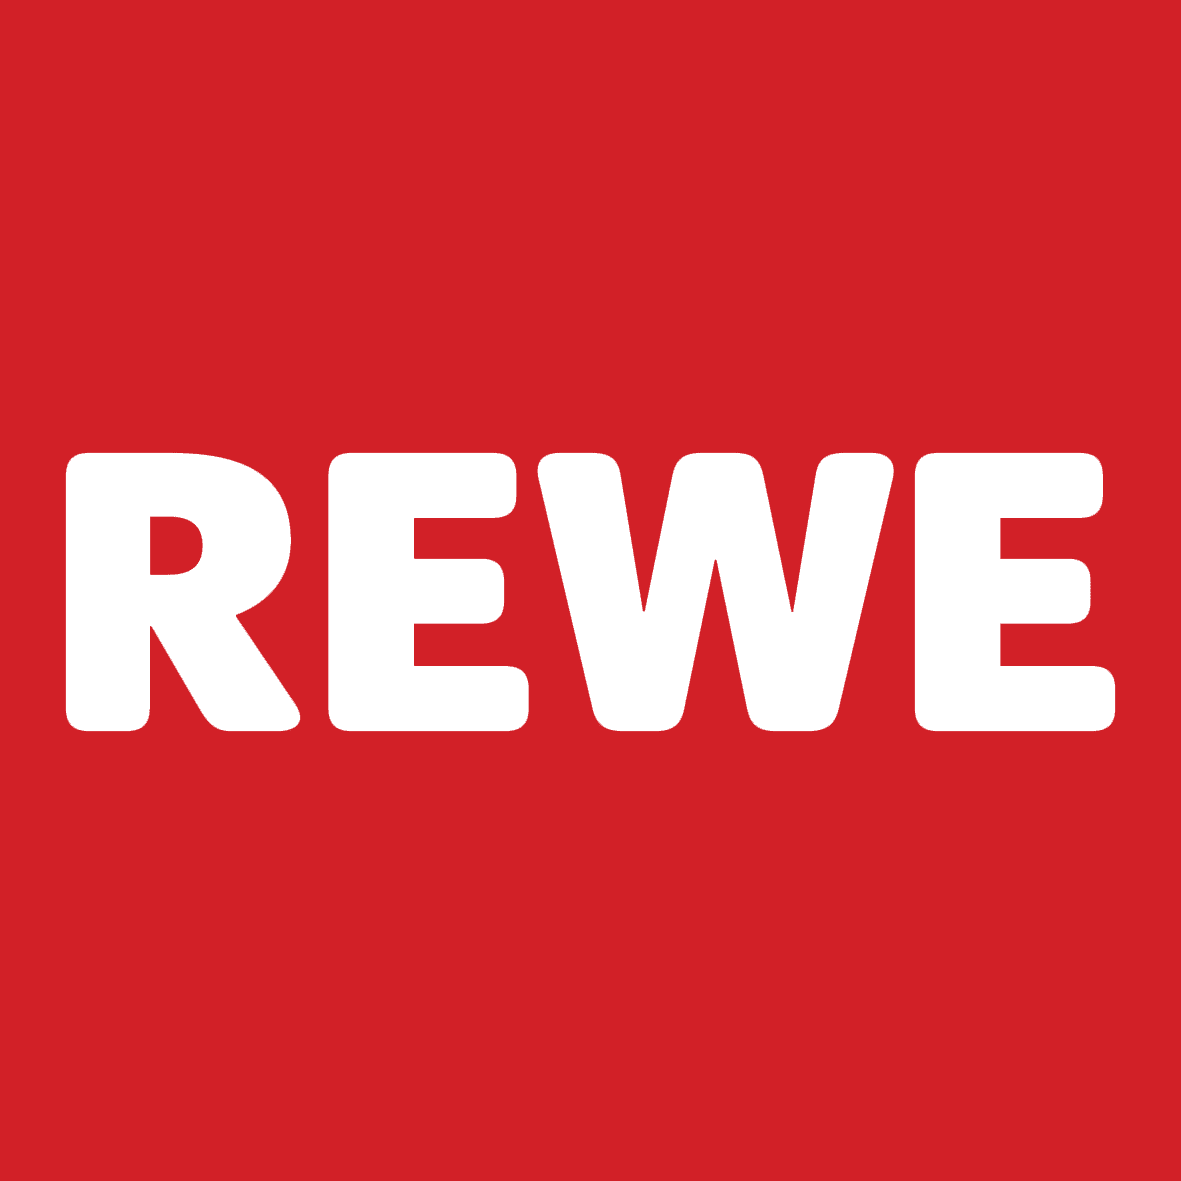 Rewe Logo Top 10 Online Grocery Stores in the World (April 17)